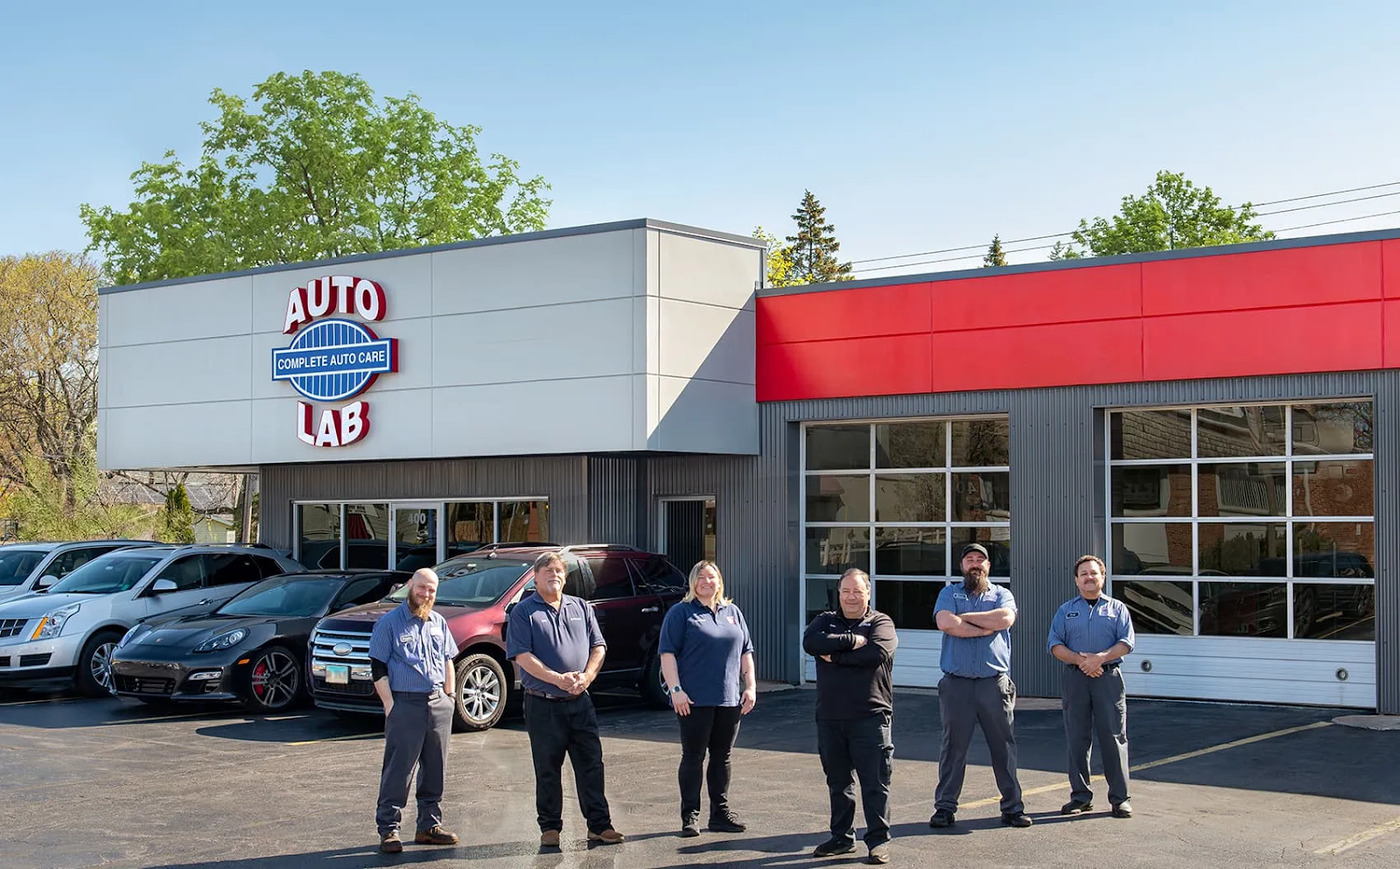 Auto Lab Libertyville was founded in 1994.